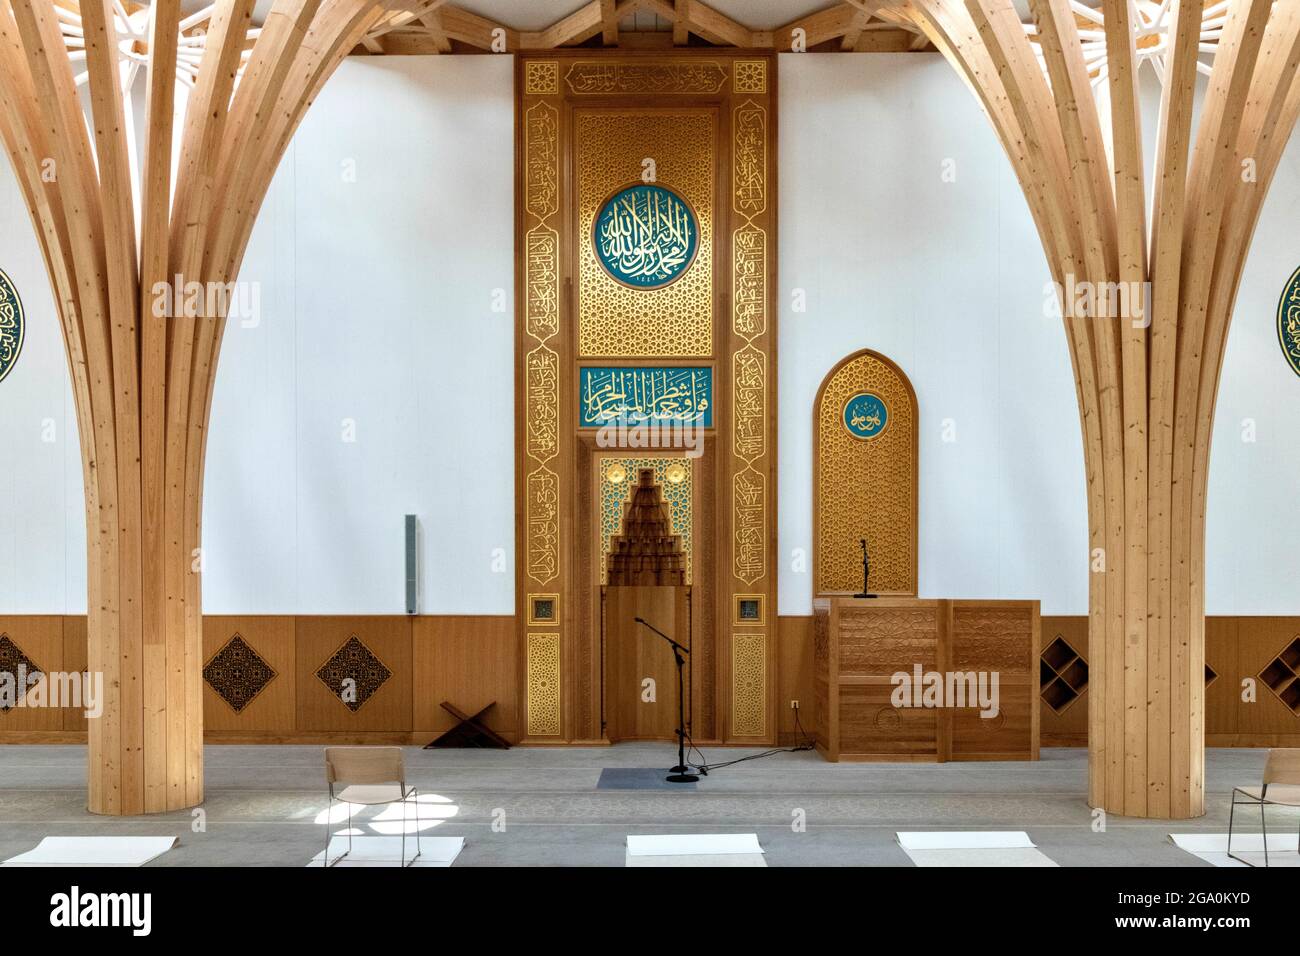 CAMBRIDGE ENGLAND CAMBRIDGE CENTRAL MOSQUE THE MAGNIFICENT PRAYER HALL PULPIT OR MINBAR AND CALLIGRAPHY Stock Photo